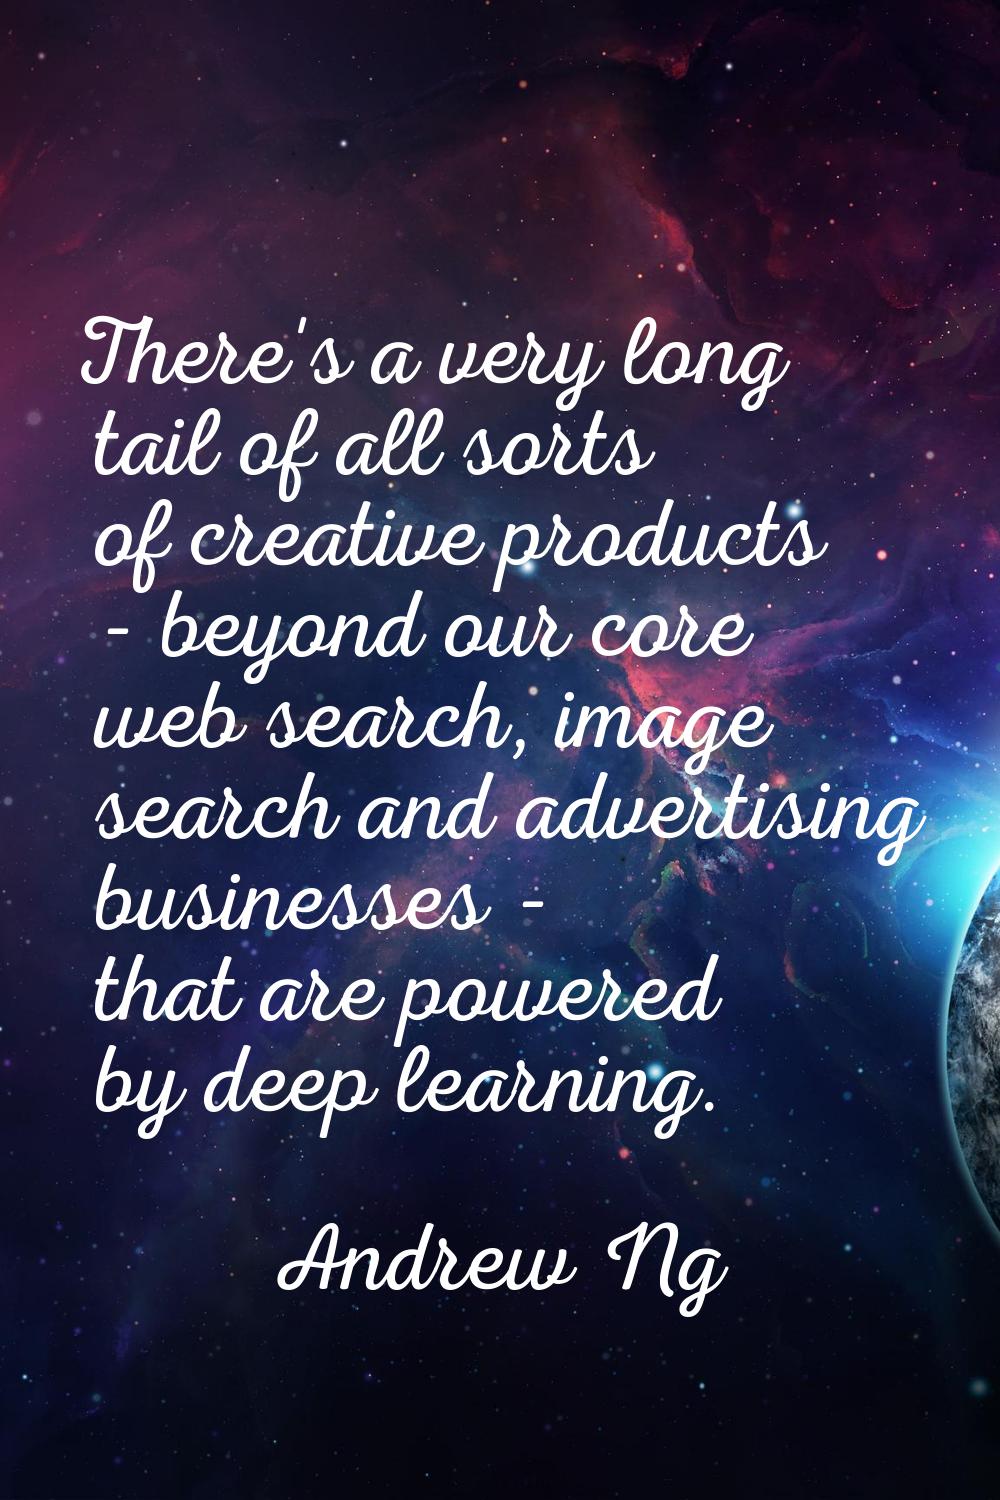 There's a very long tail of all sorts of creative products - beyond our core web search, image sear